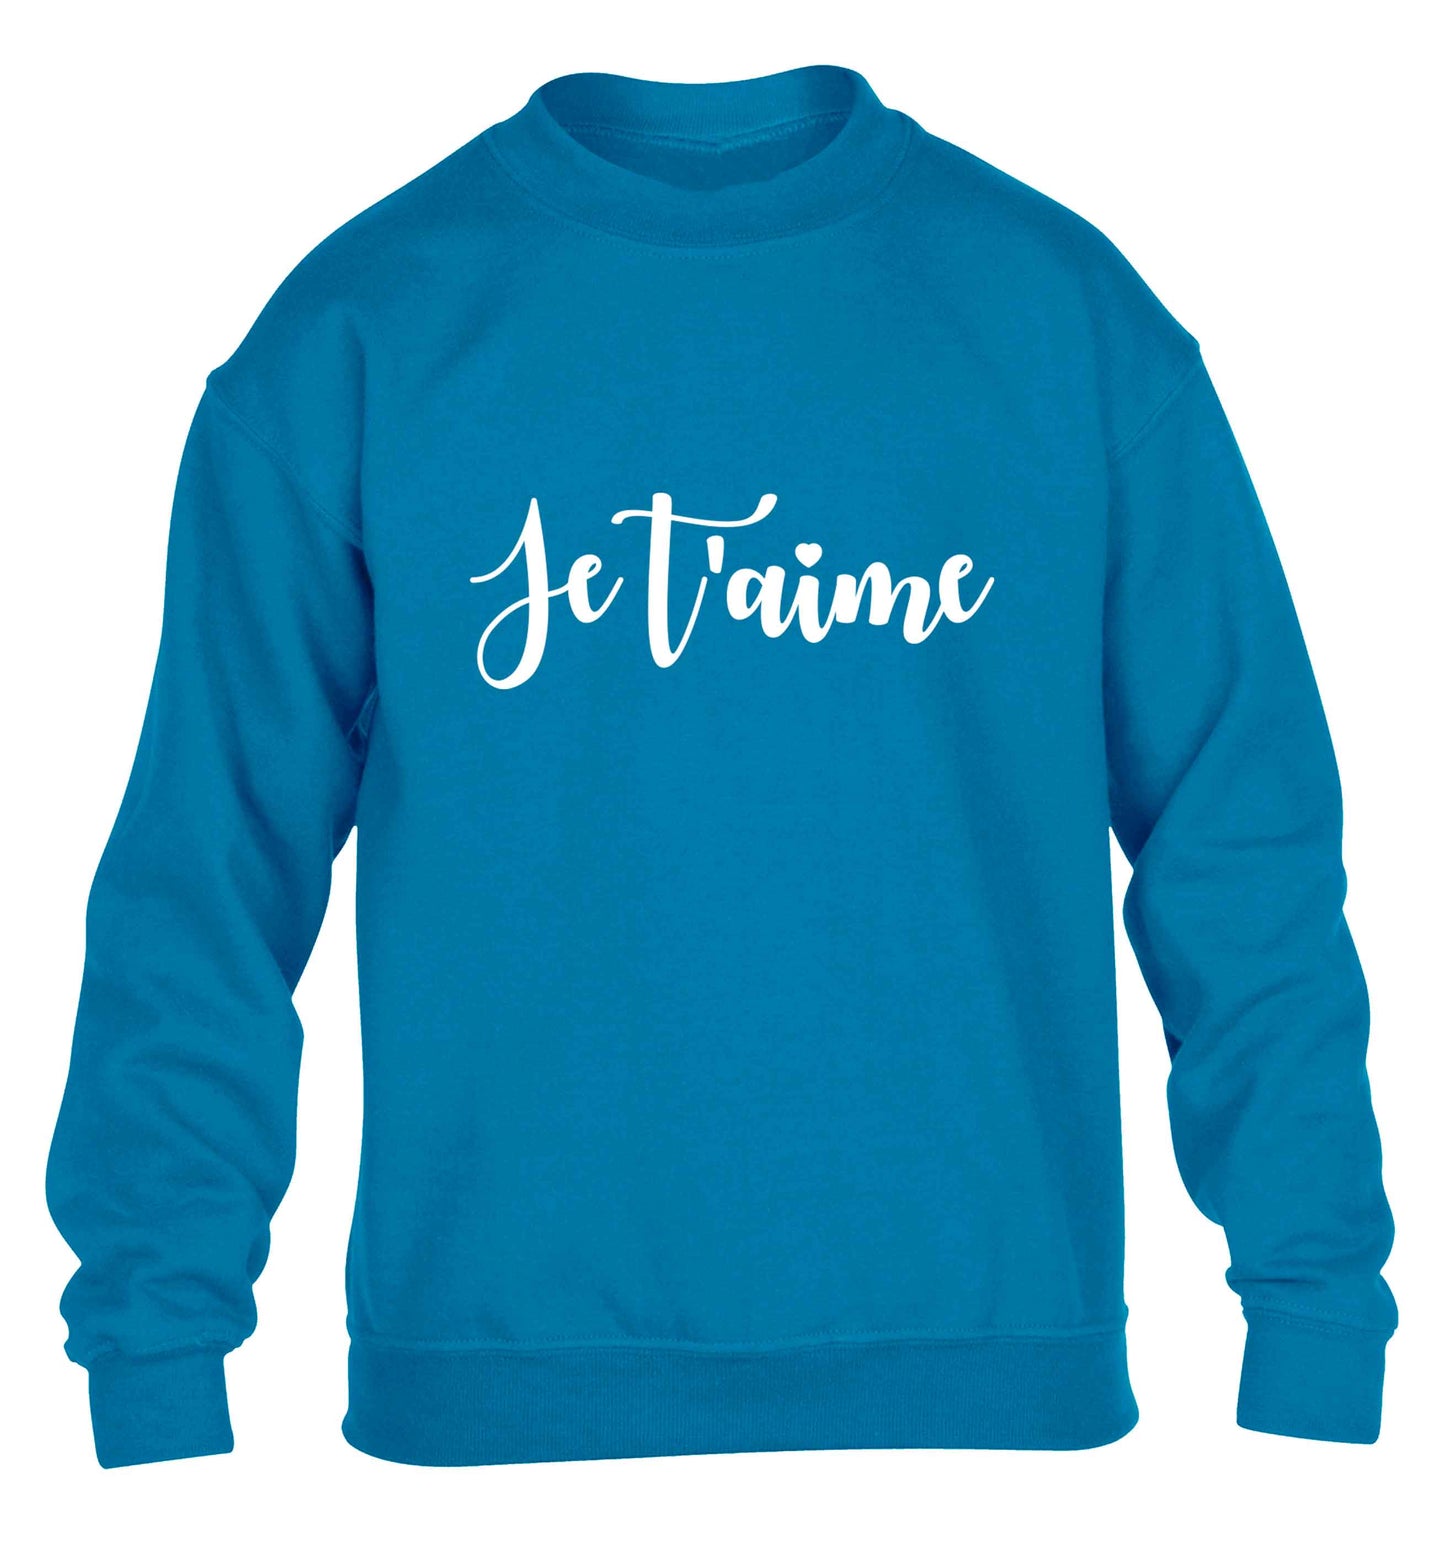 Je t'aime children's blue sweater 12-13 Years